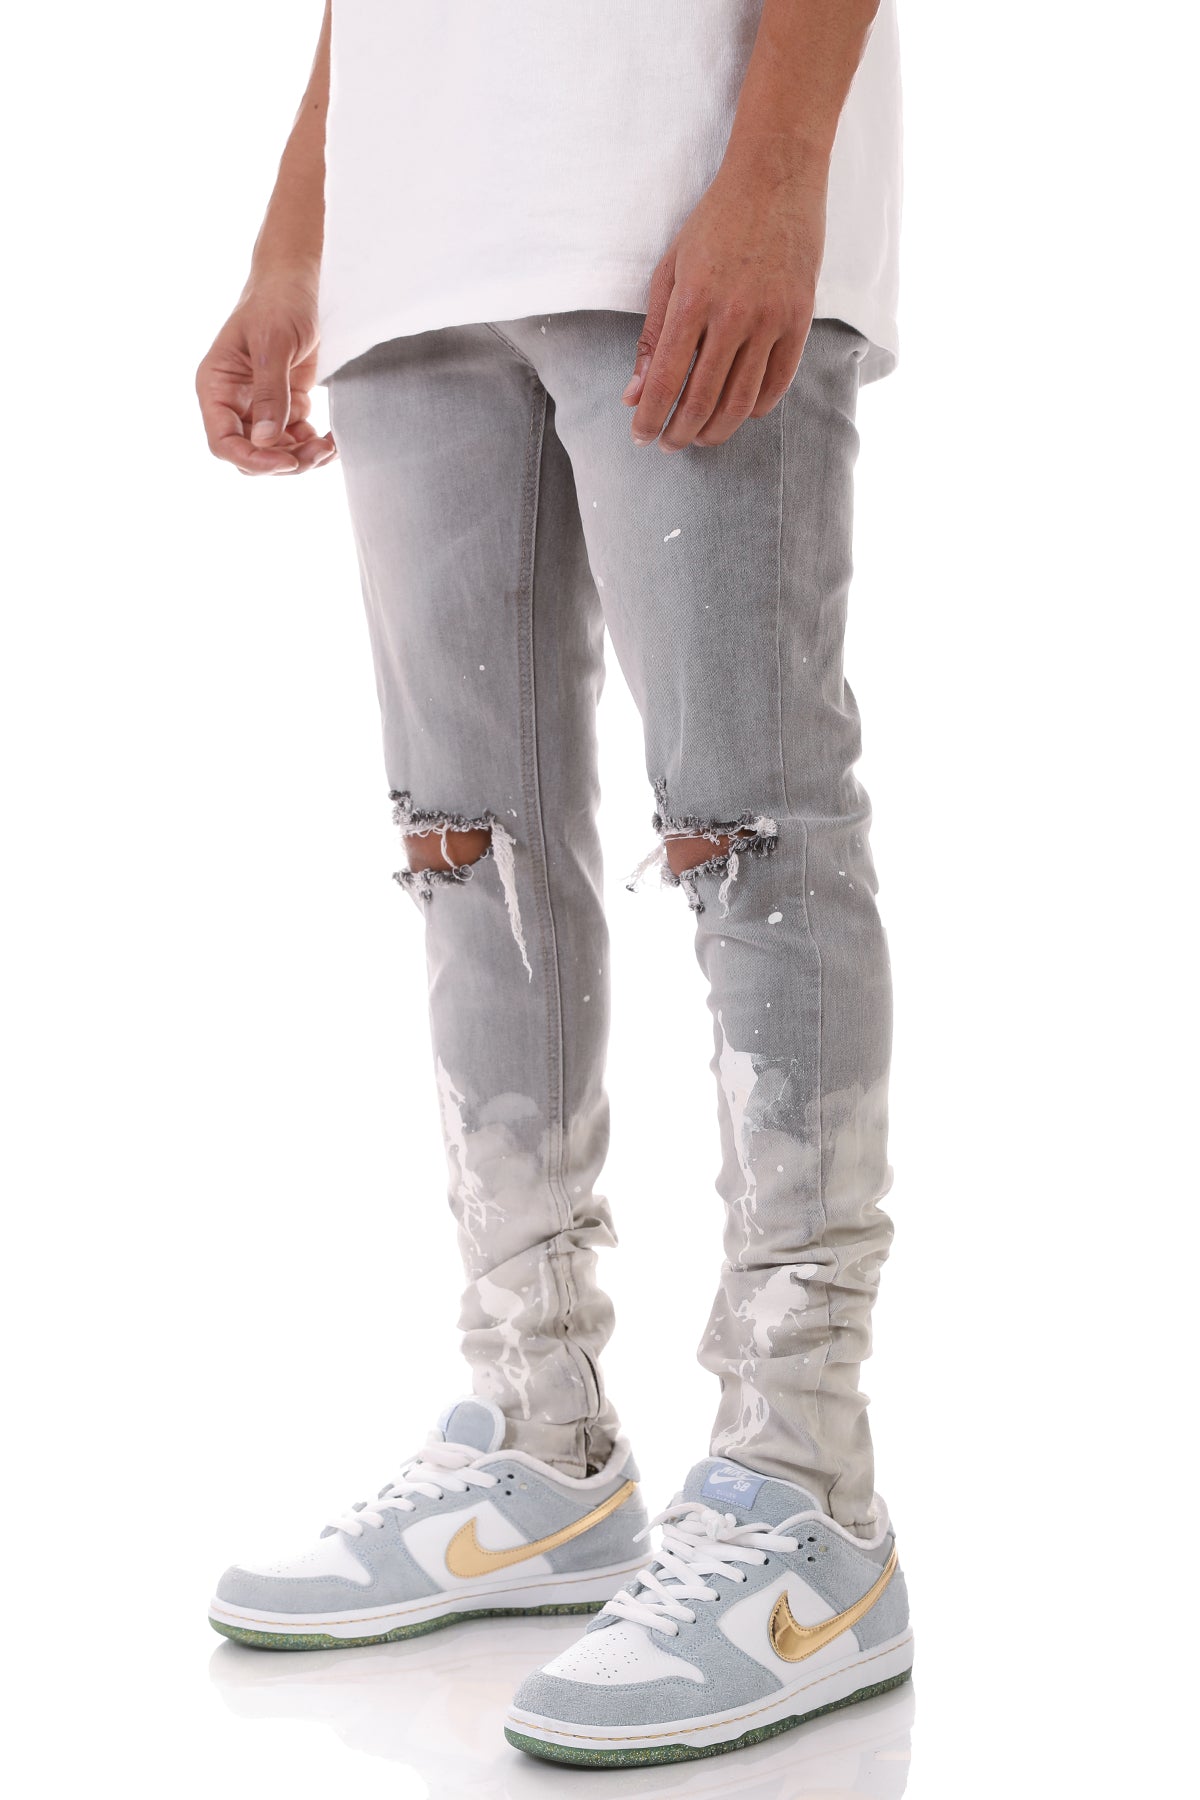 PAINTER'S DISTRESSED ANKLE ZIP JEANS